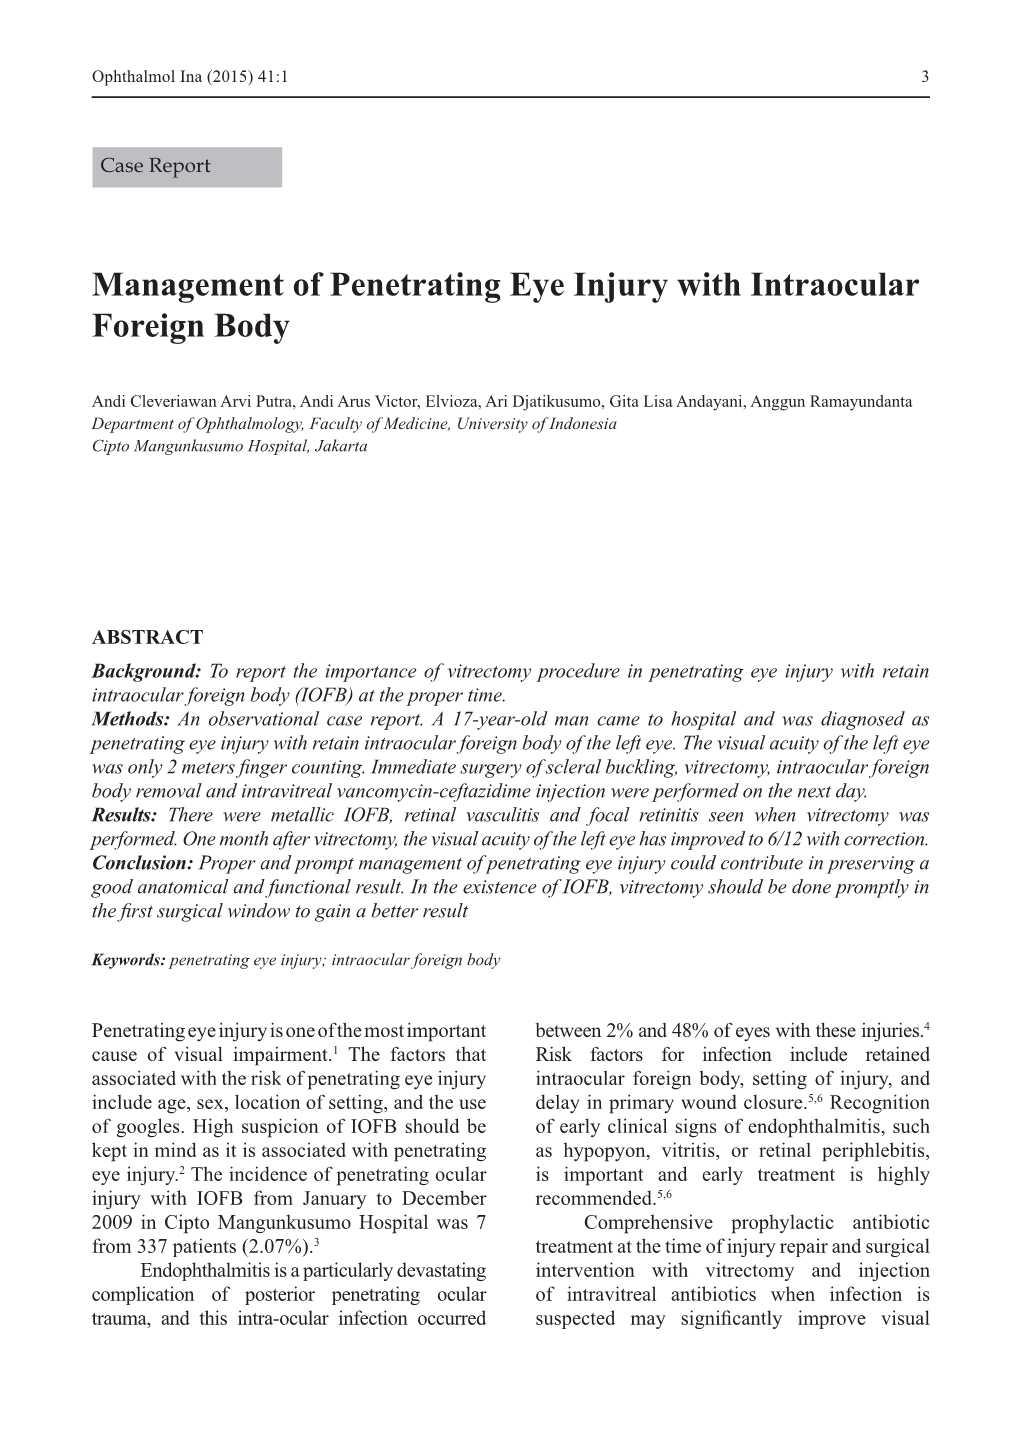 Management of Penetrating Eye Injury with Intraocular Foreign Body